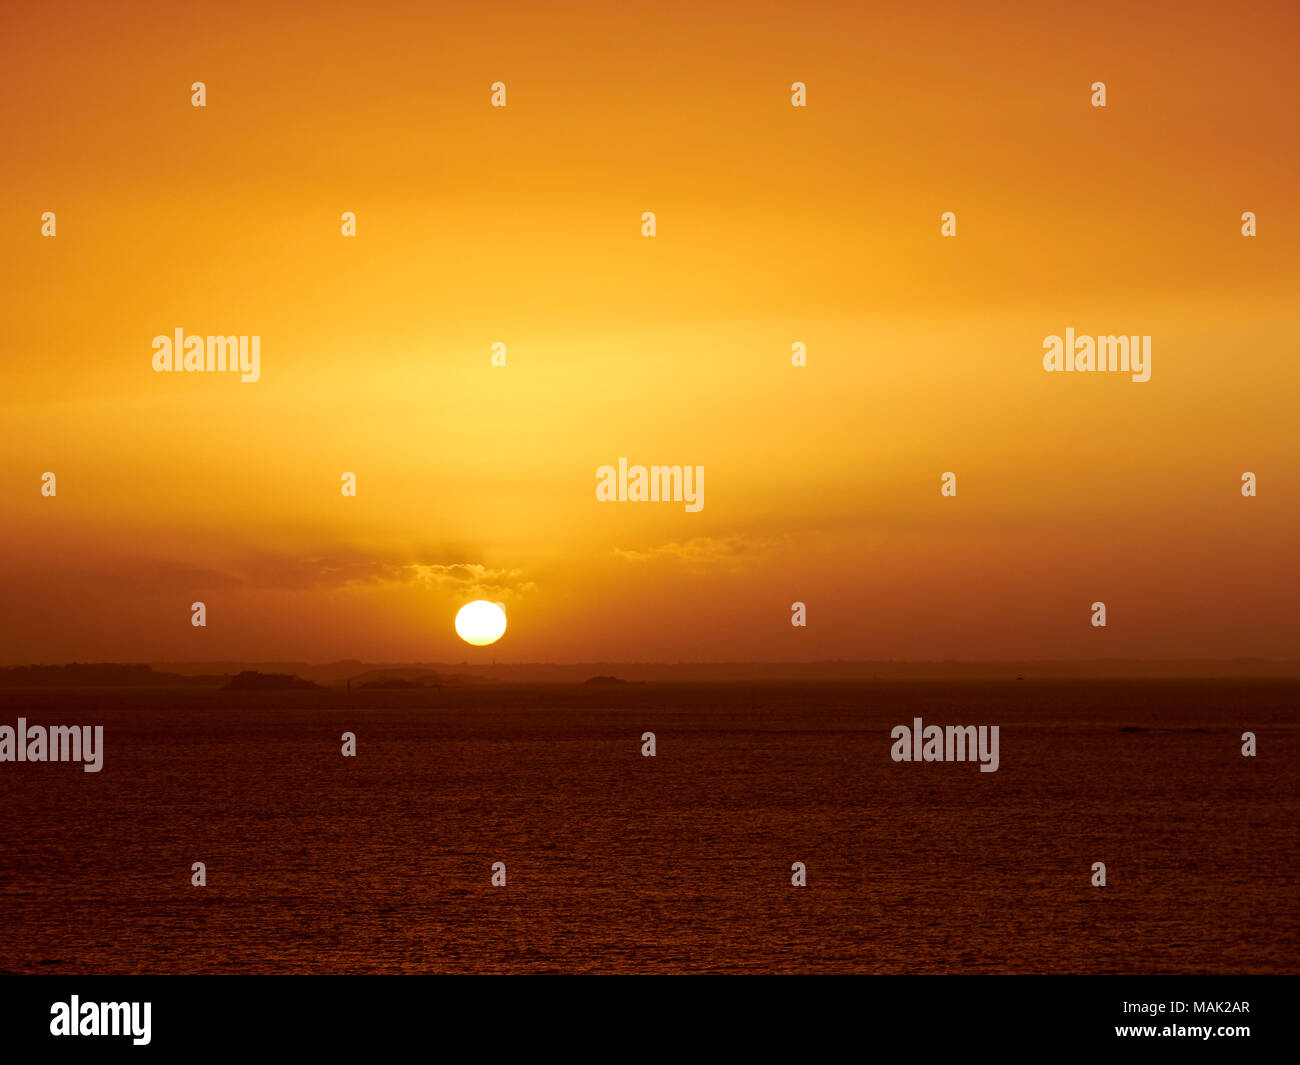 Image of Sunset over the sea, St Malo, France, Dust in the air. Stock Photo